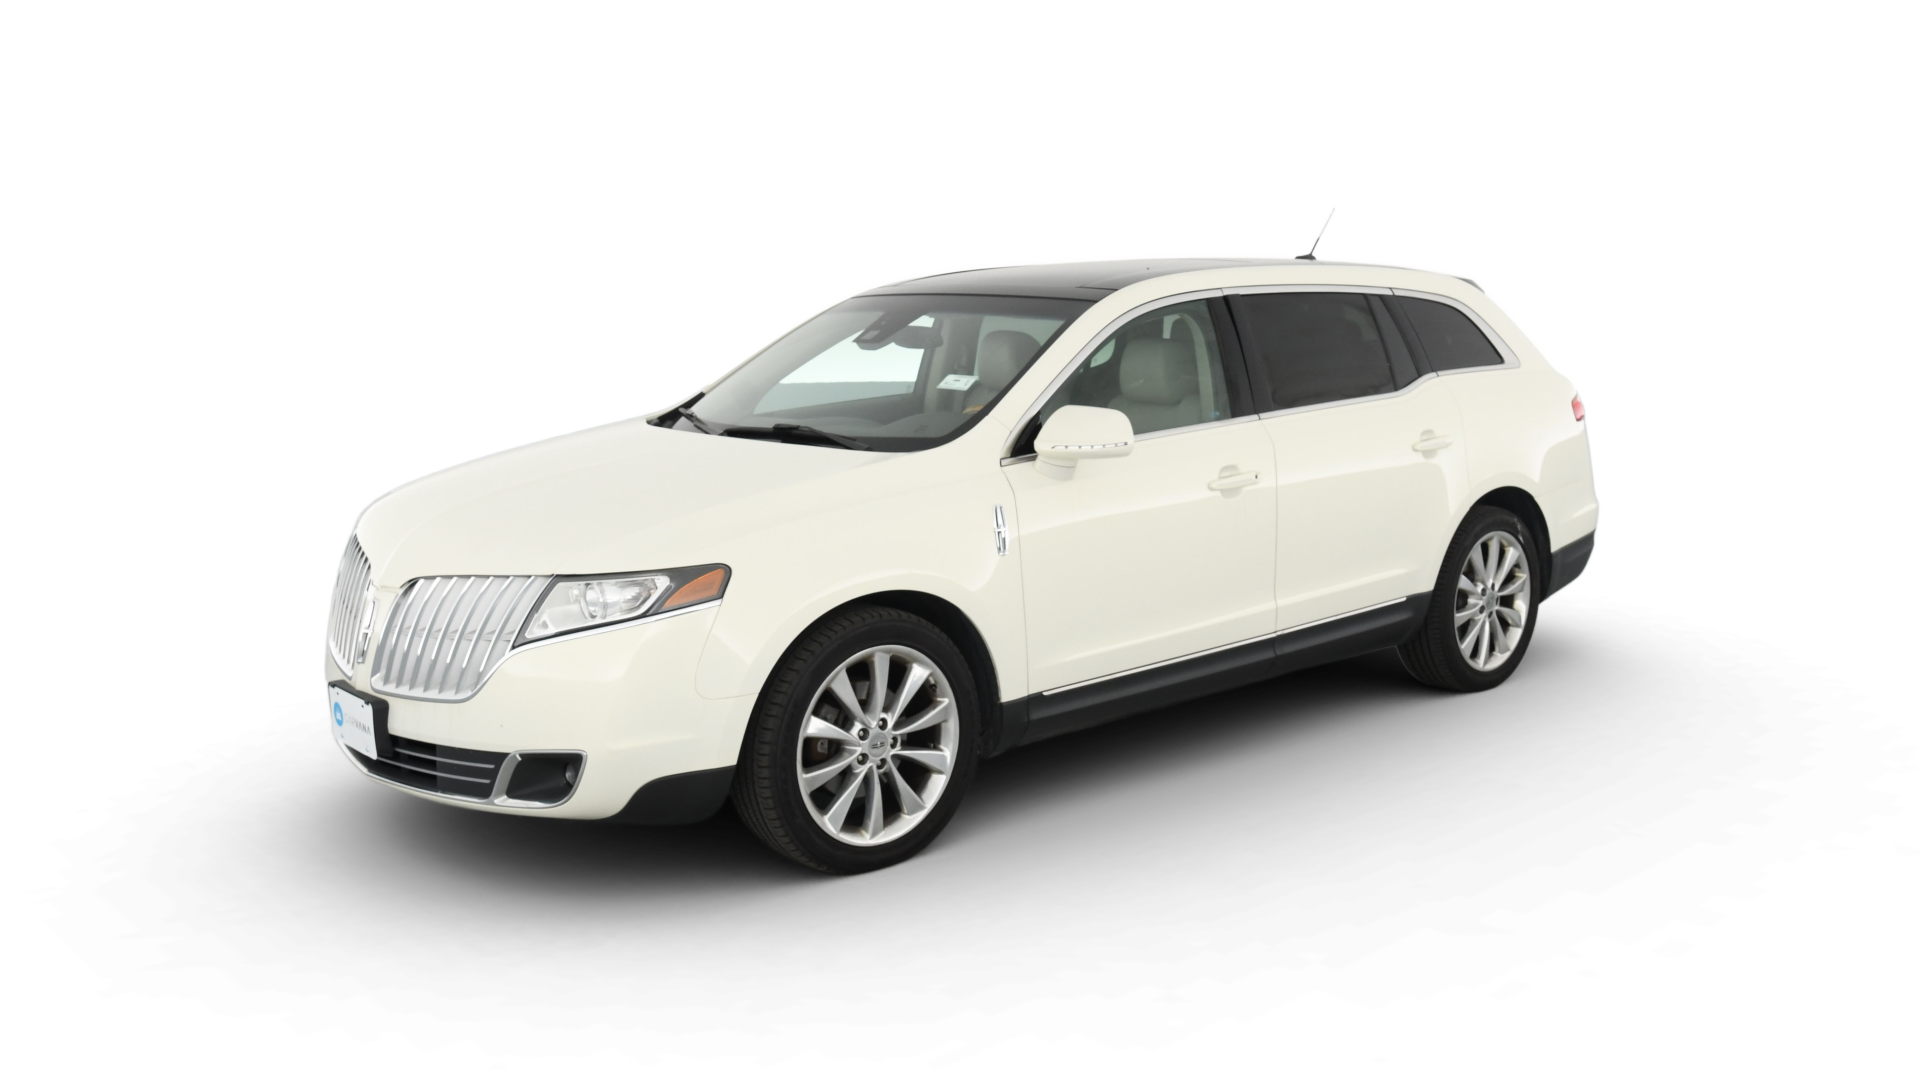 Used 2012 Lincoln MKT for sale in Saint Louis, MO | Carvana